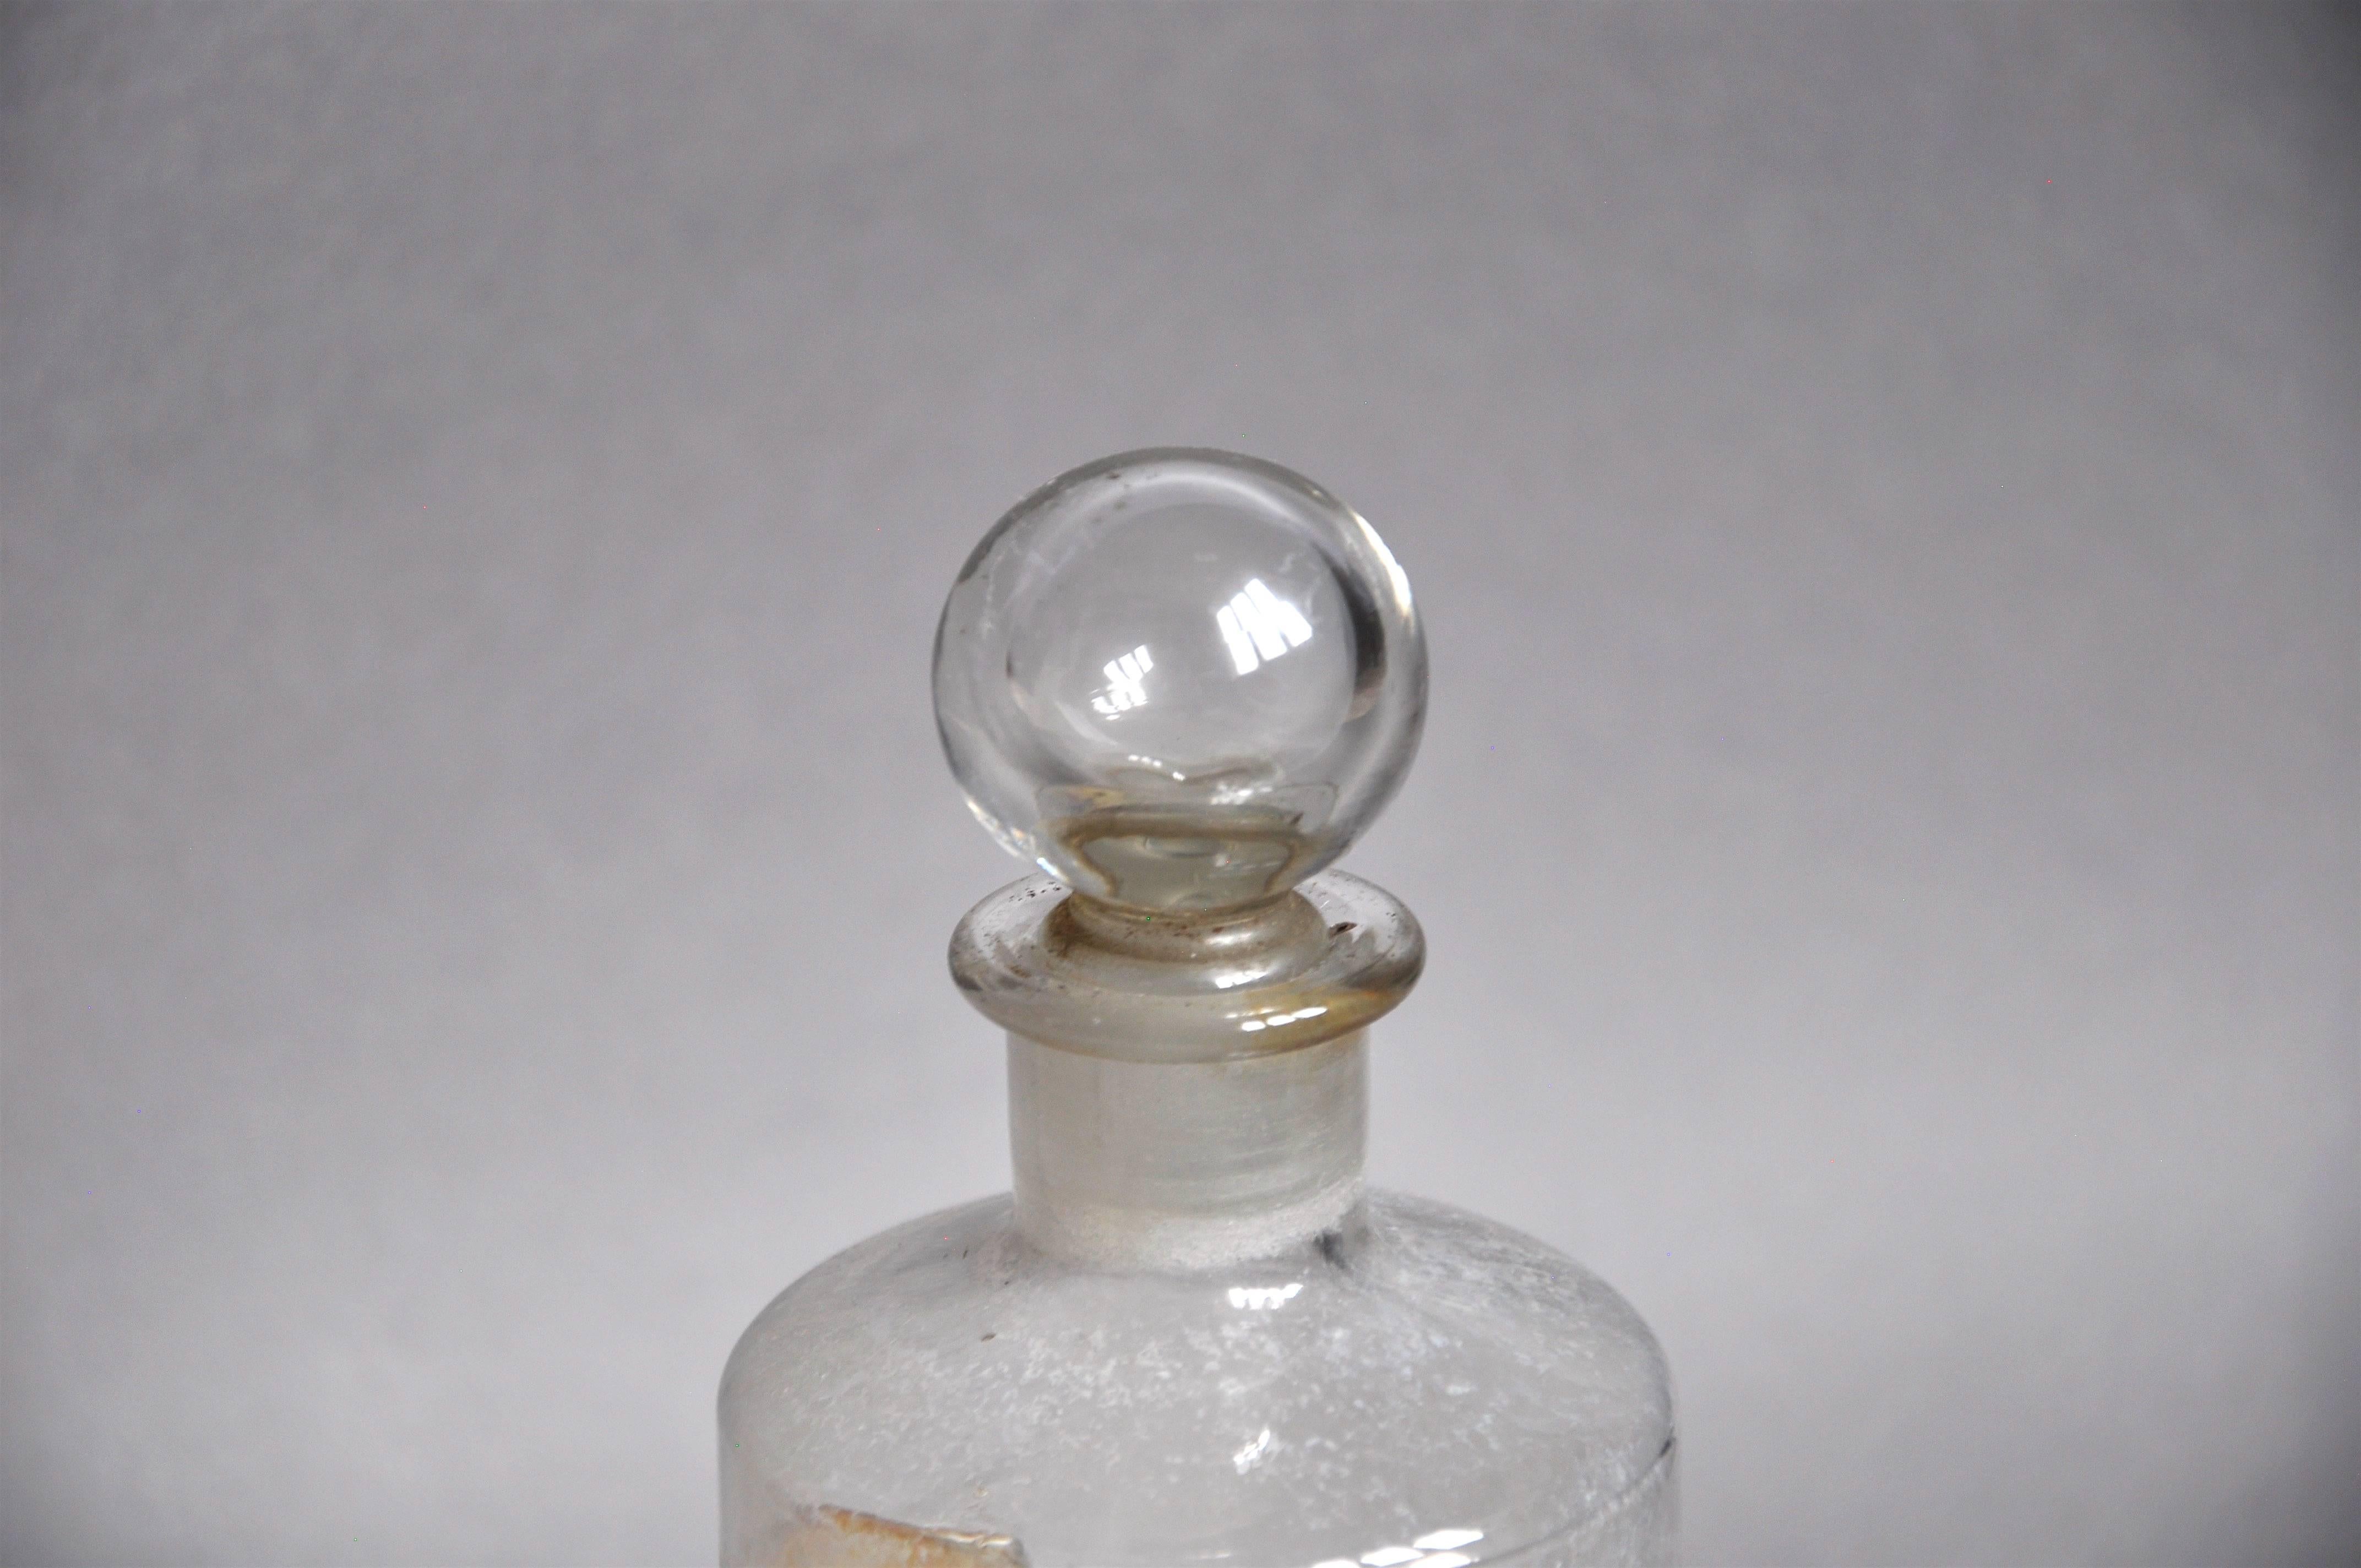 Victorian Christmas - Rare Antique Pharmacy Bottle, ‘Lavender’ Apothecary Glass Gold Leaf For Sale